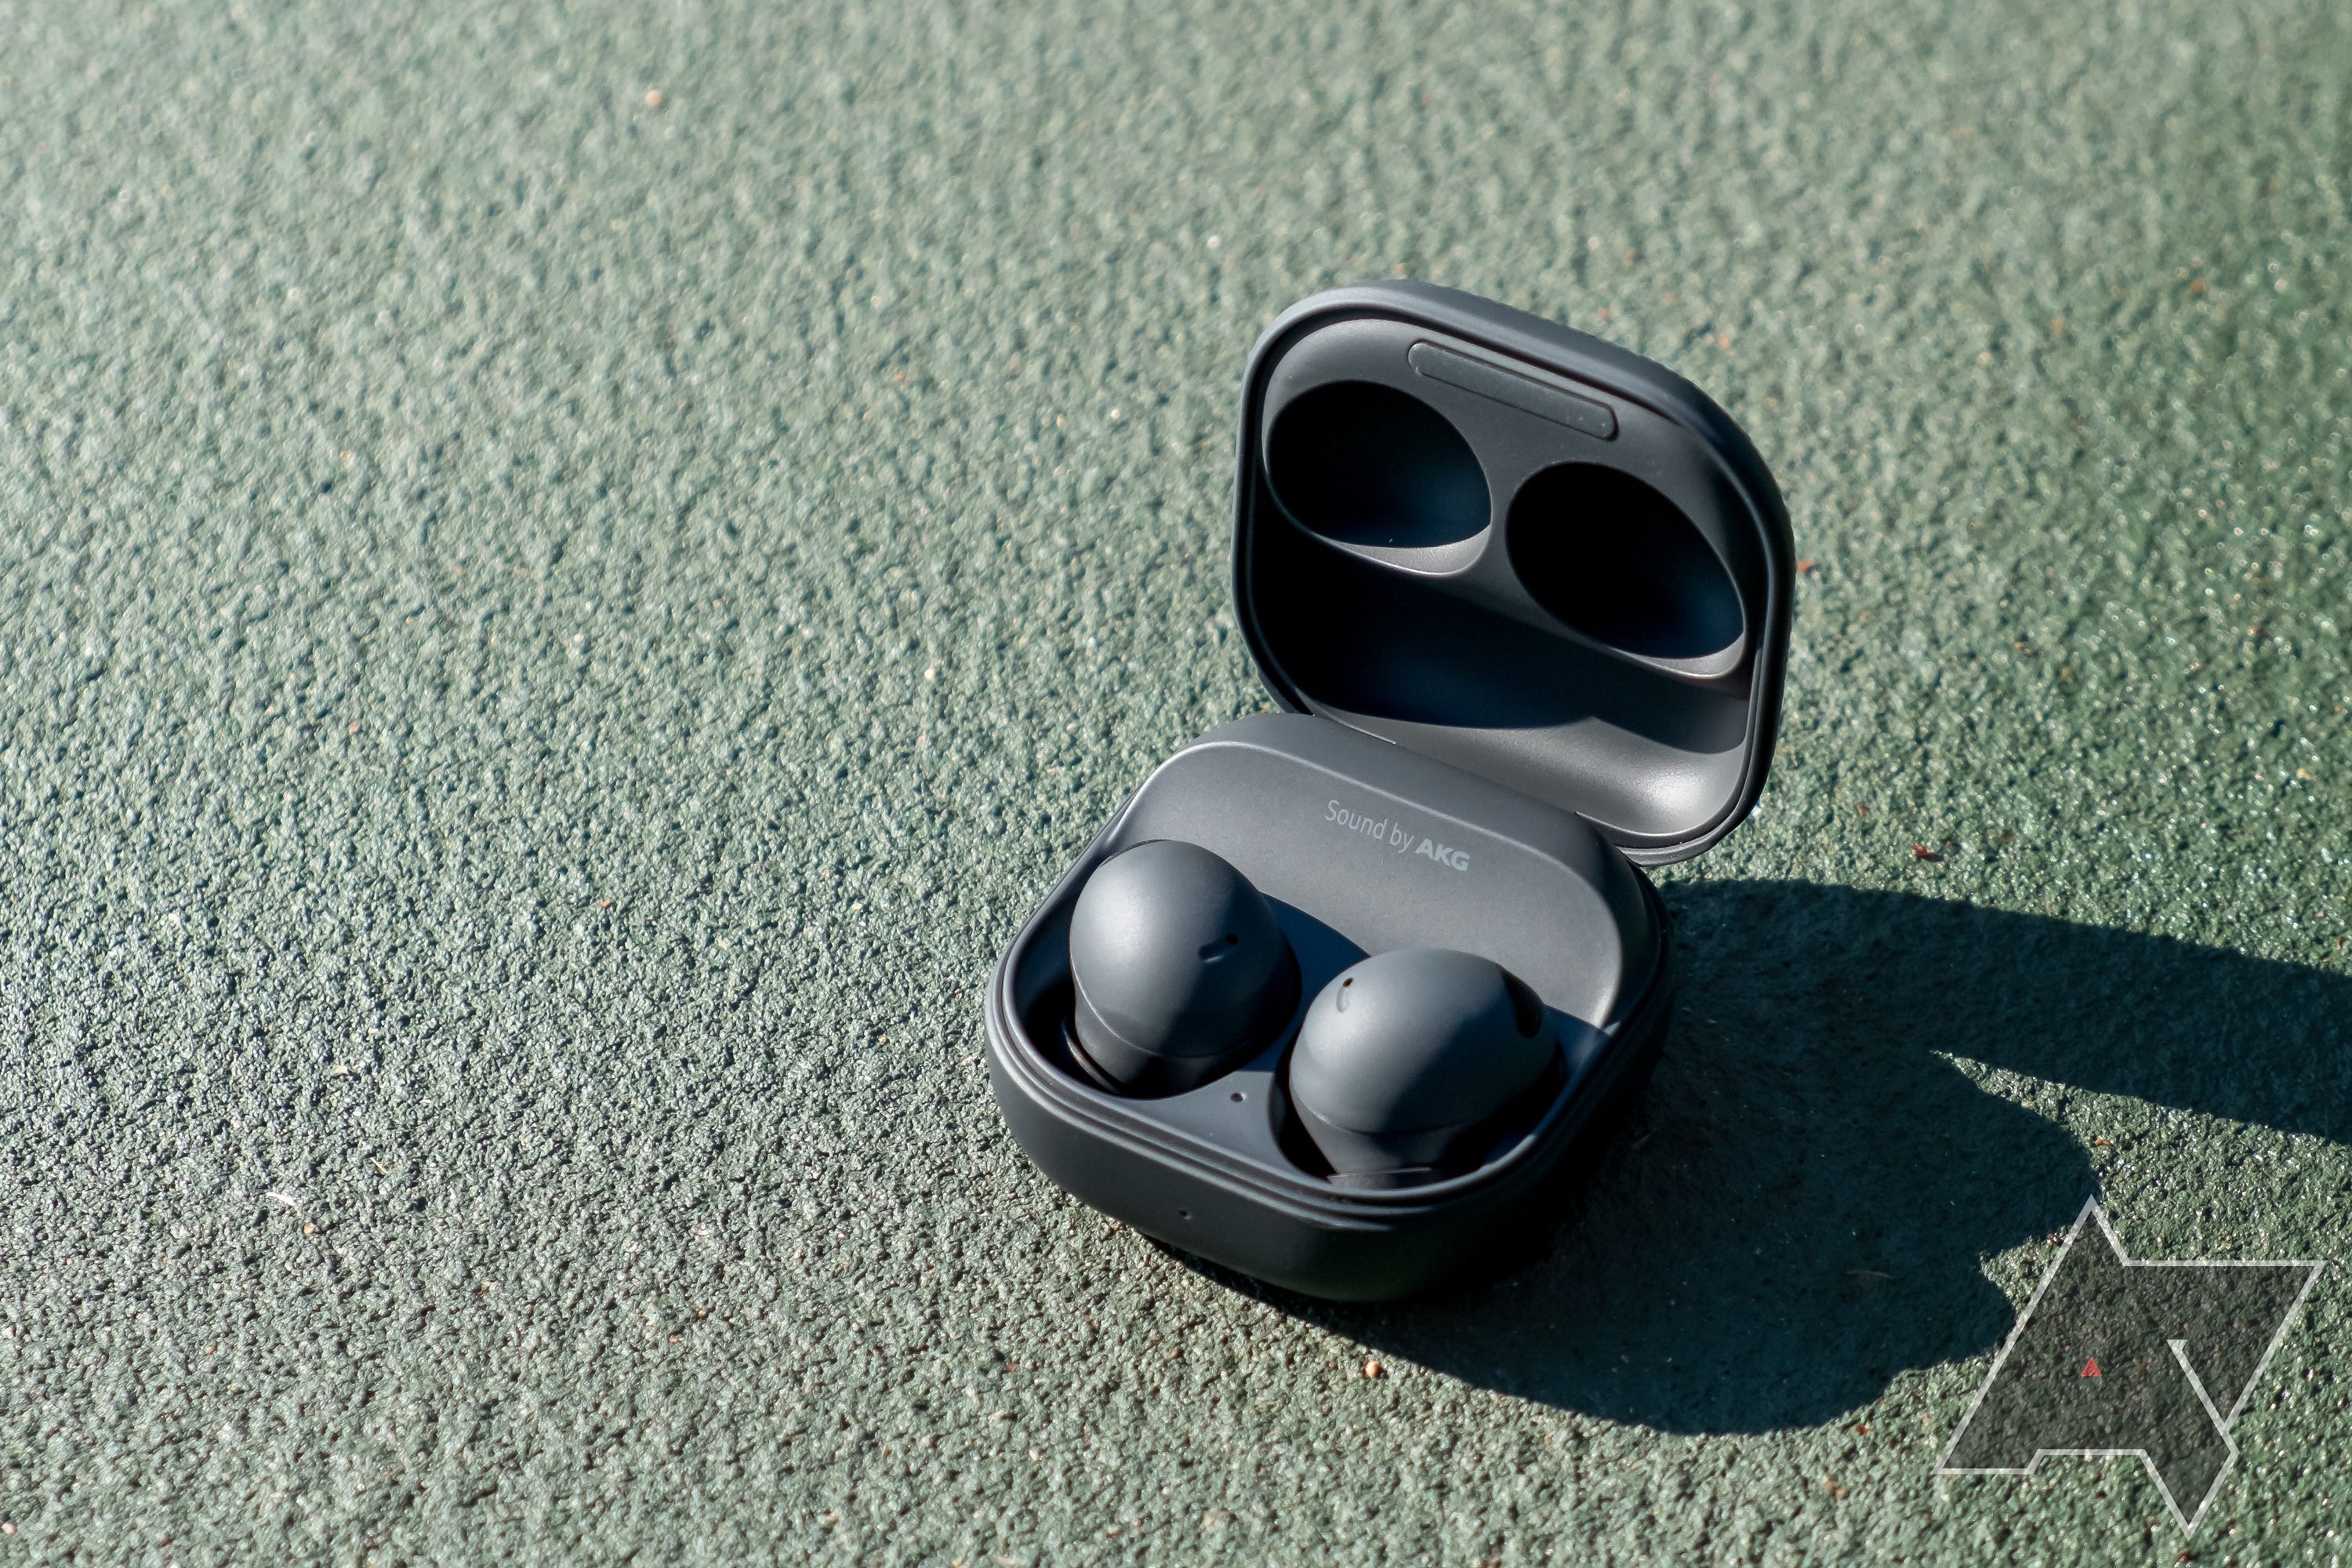 The Samsung Galaxy Buds 2 Pro in their case with the lid open on a green background, with a sharp shadow to the right